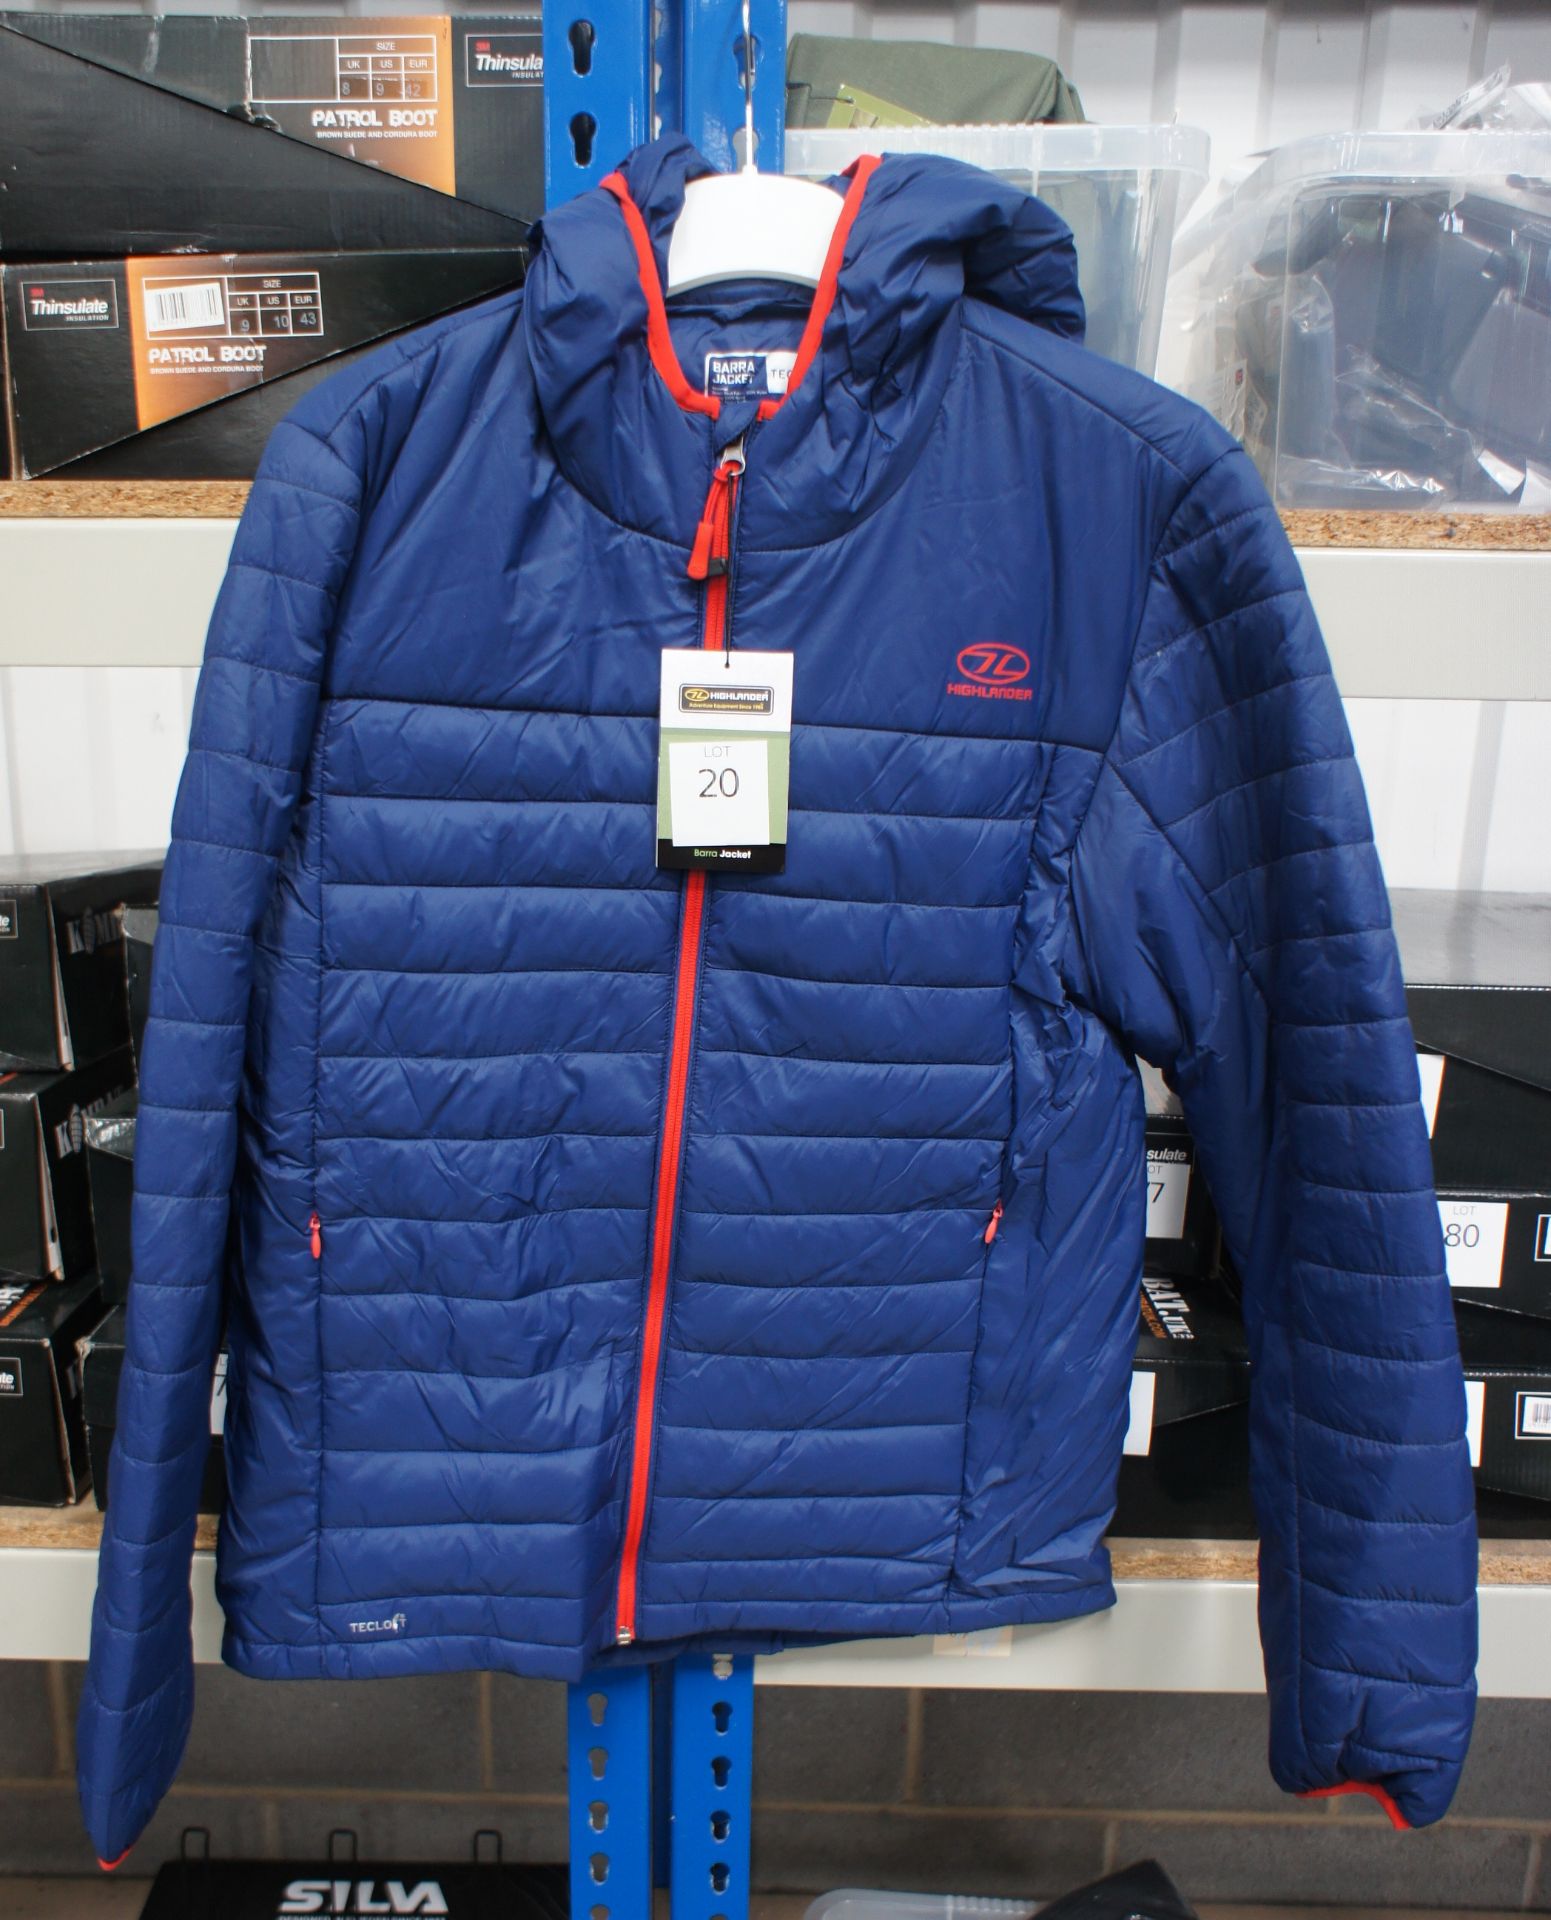 Kam Barra Insulated Jacket S Rrp. £44.99 - Image 2 of 2